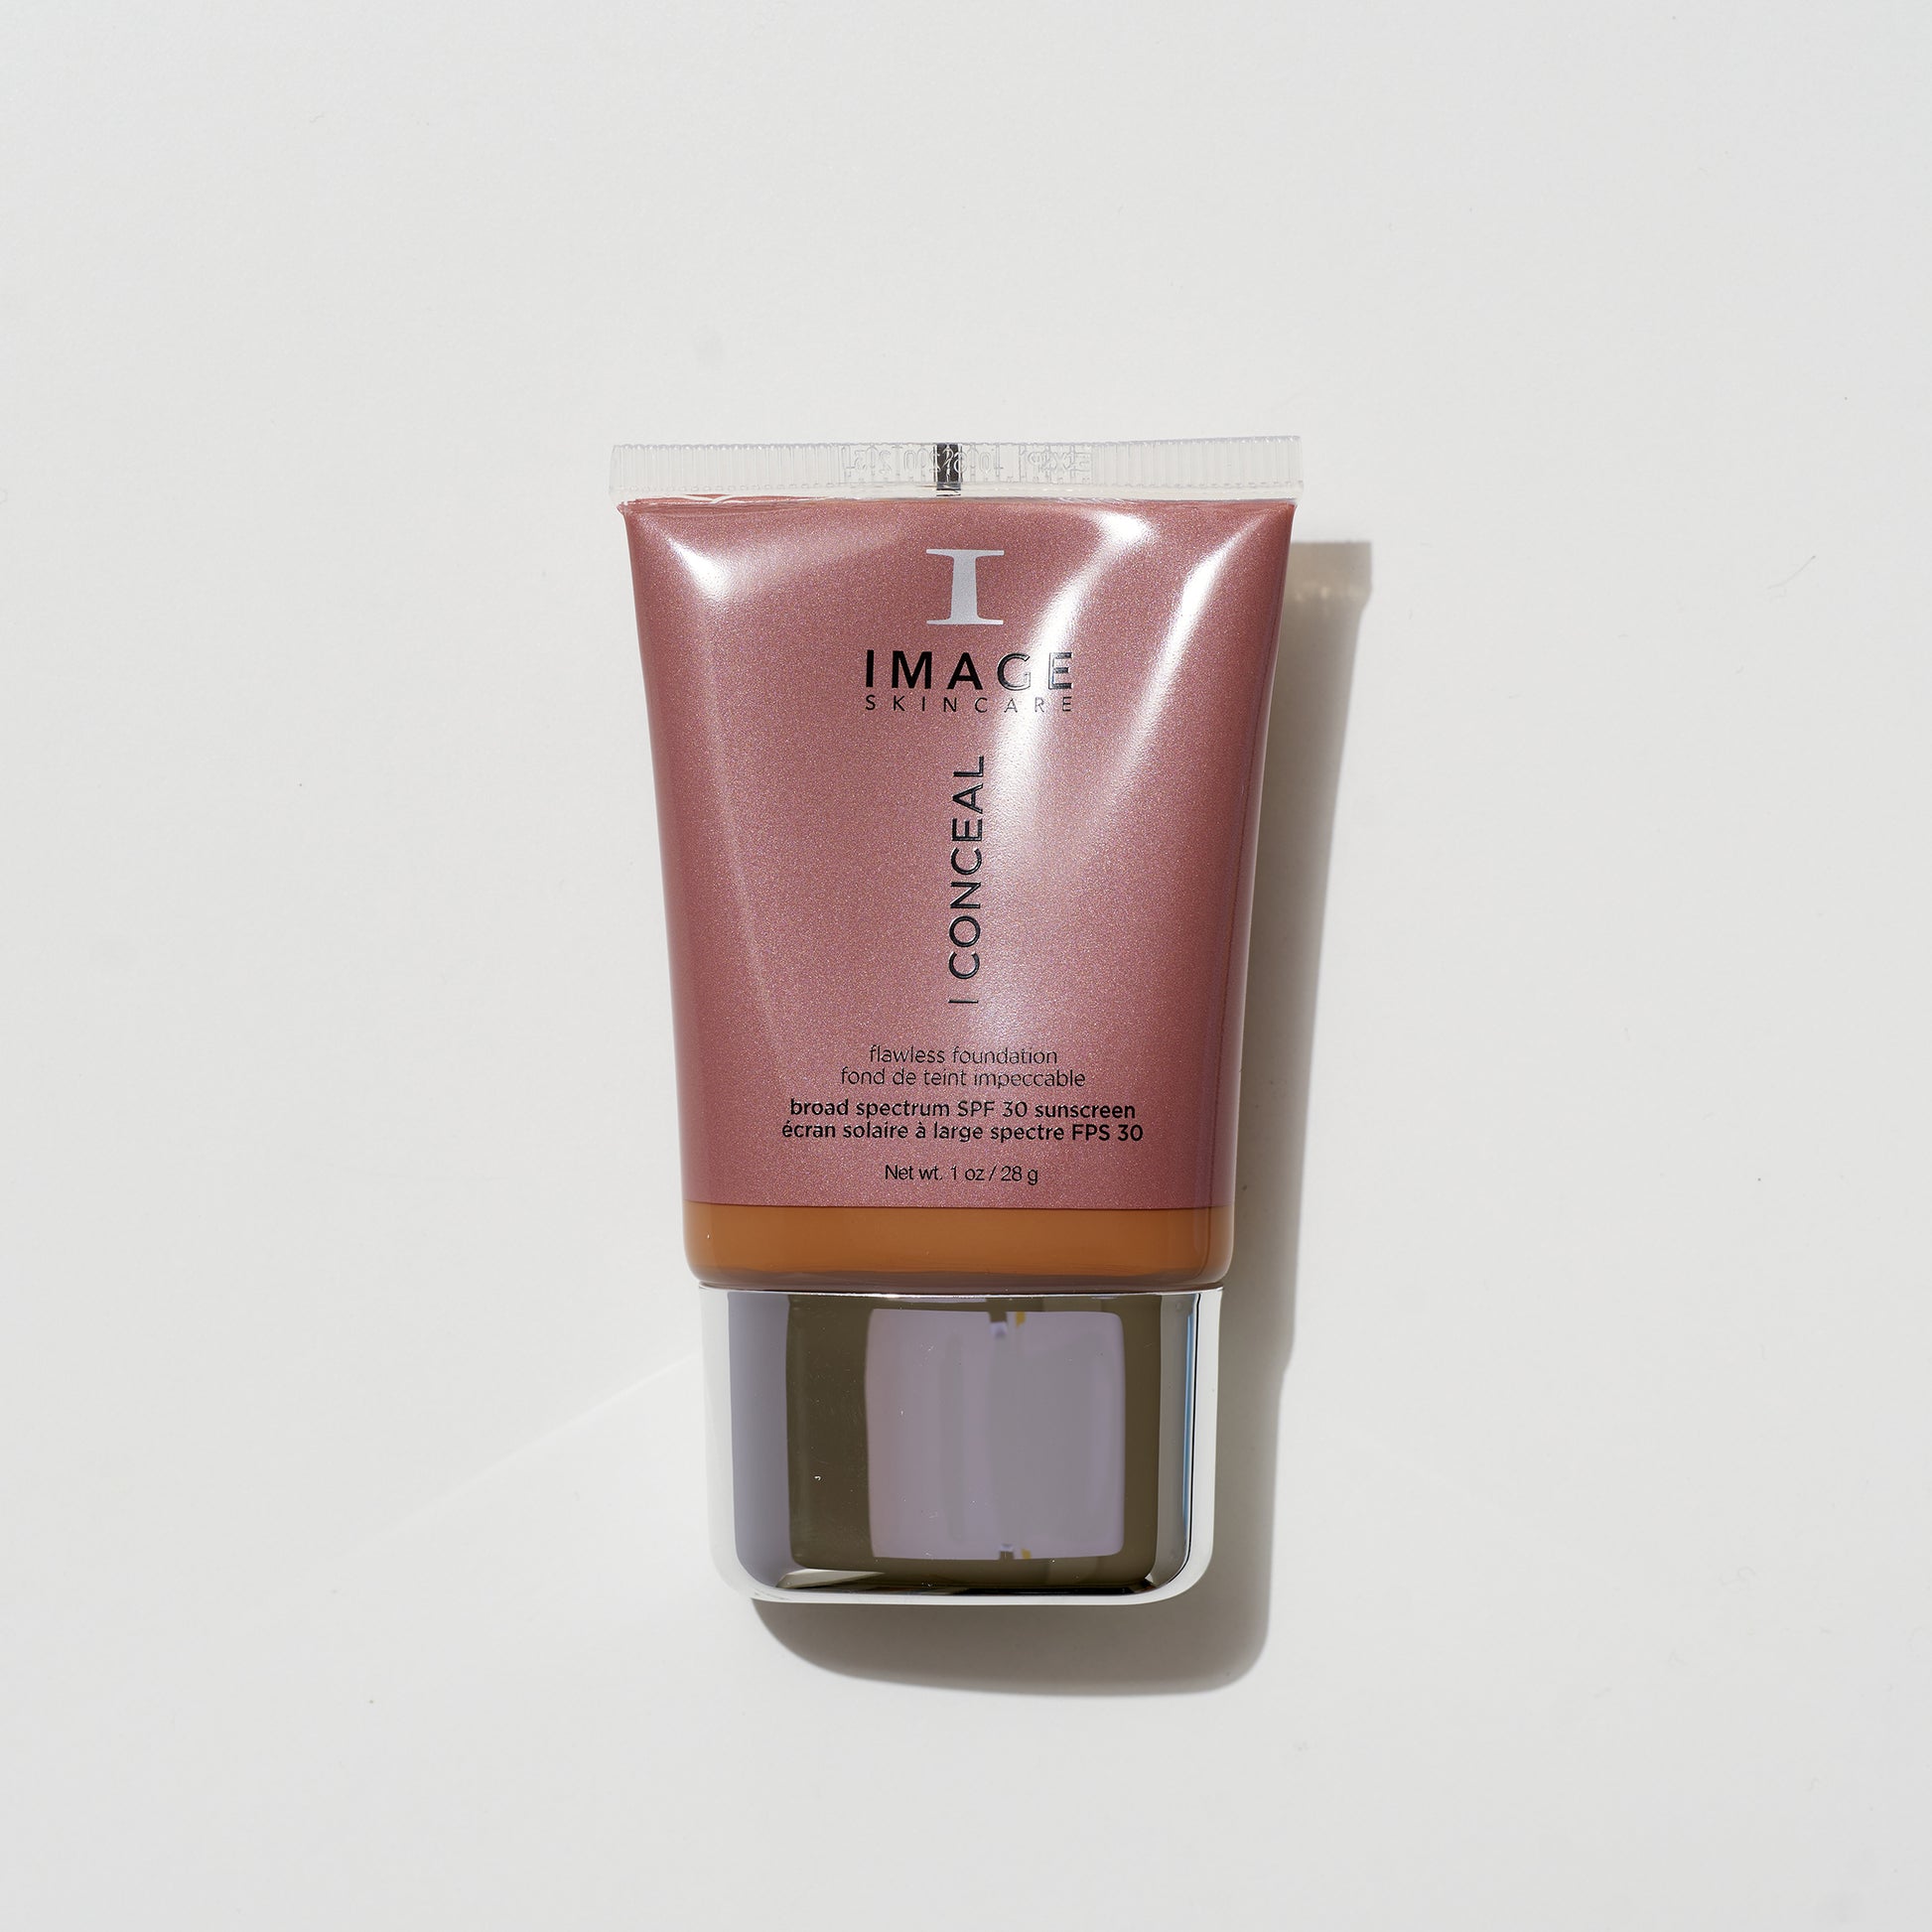 I CONCEAL flawless foundation broad-spectrum SPF 30 deep honey, Image Skincare